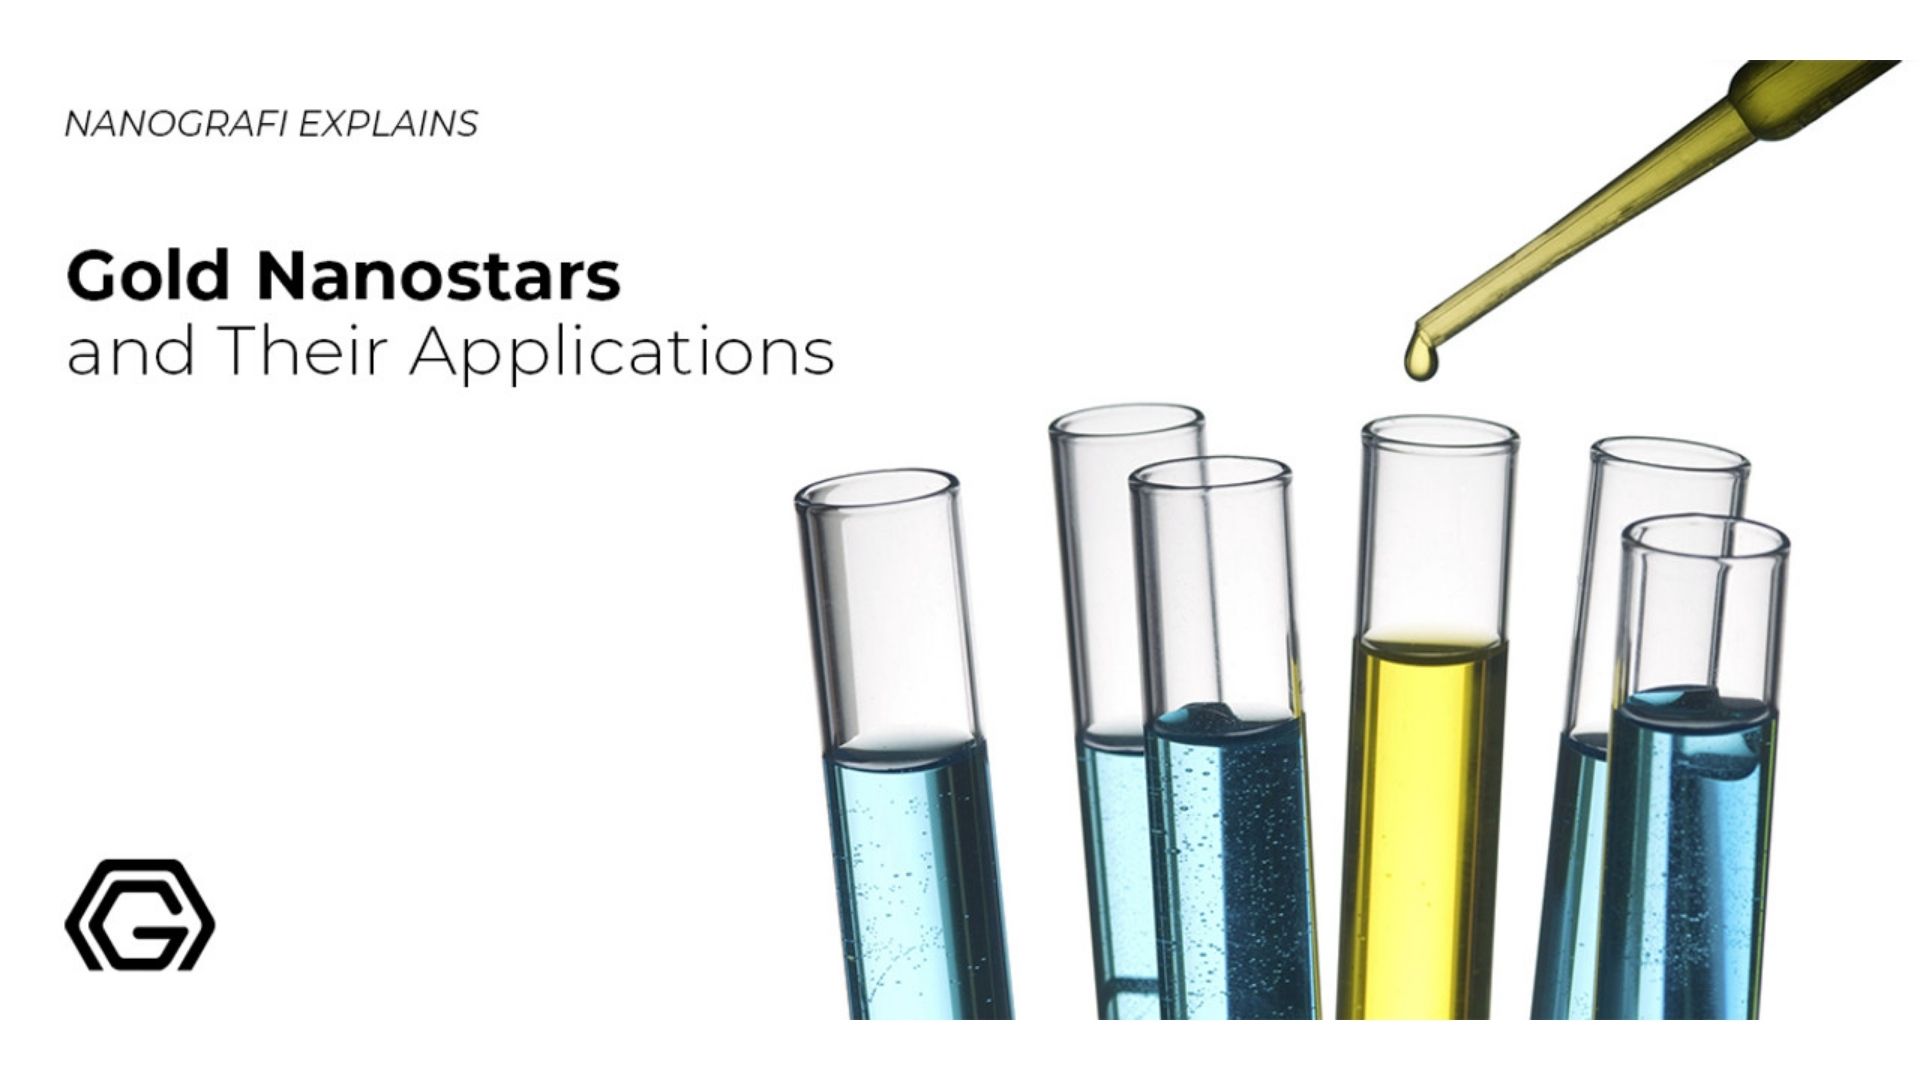 Gold nanostars and their applications